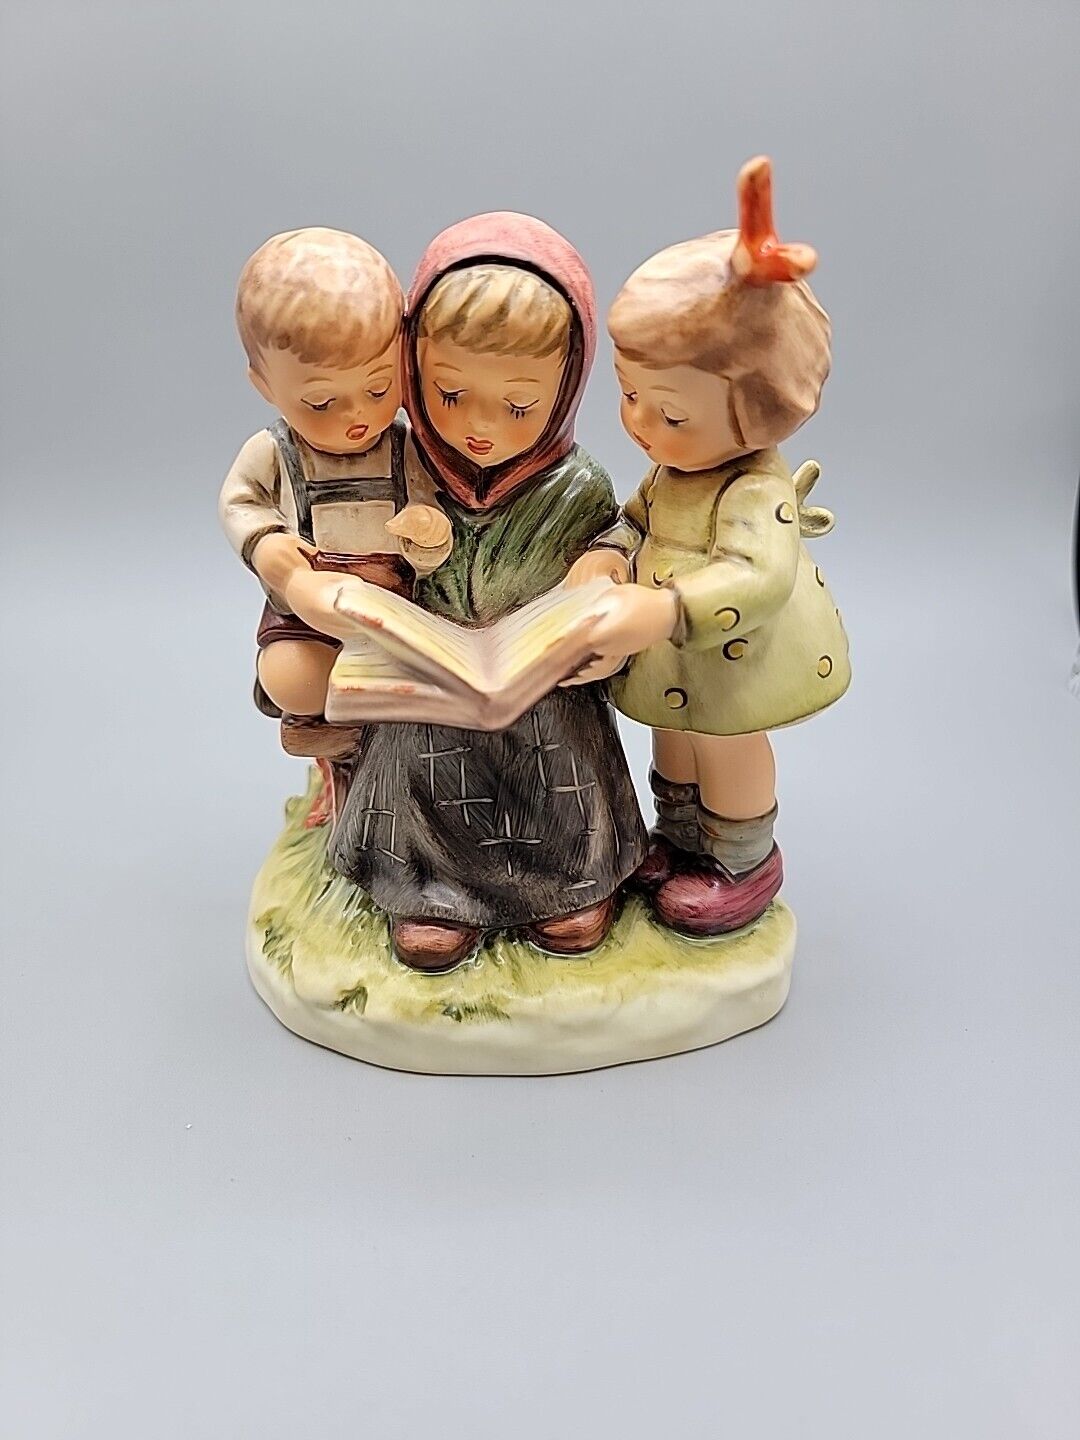 Hummel Storybook Time Figurine #458 1992 First Issue Vintage TMK 7 Small Crown 